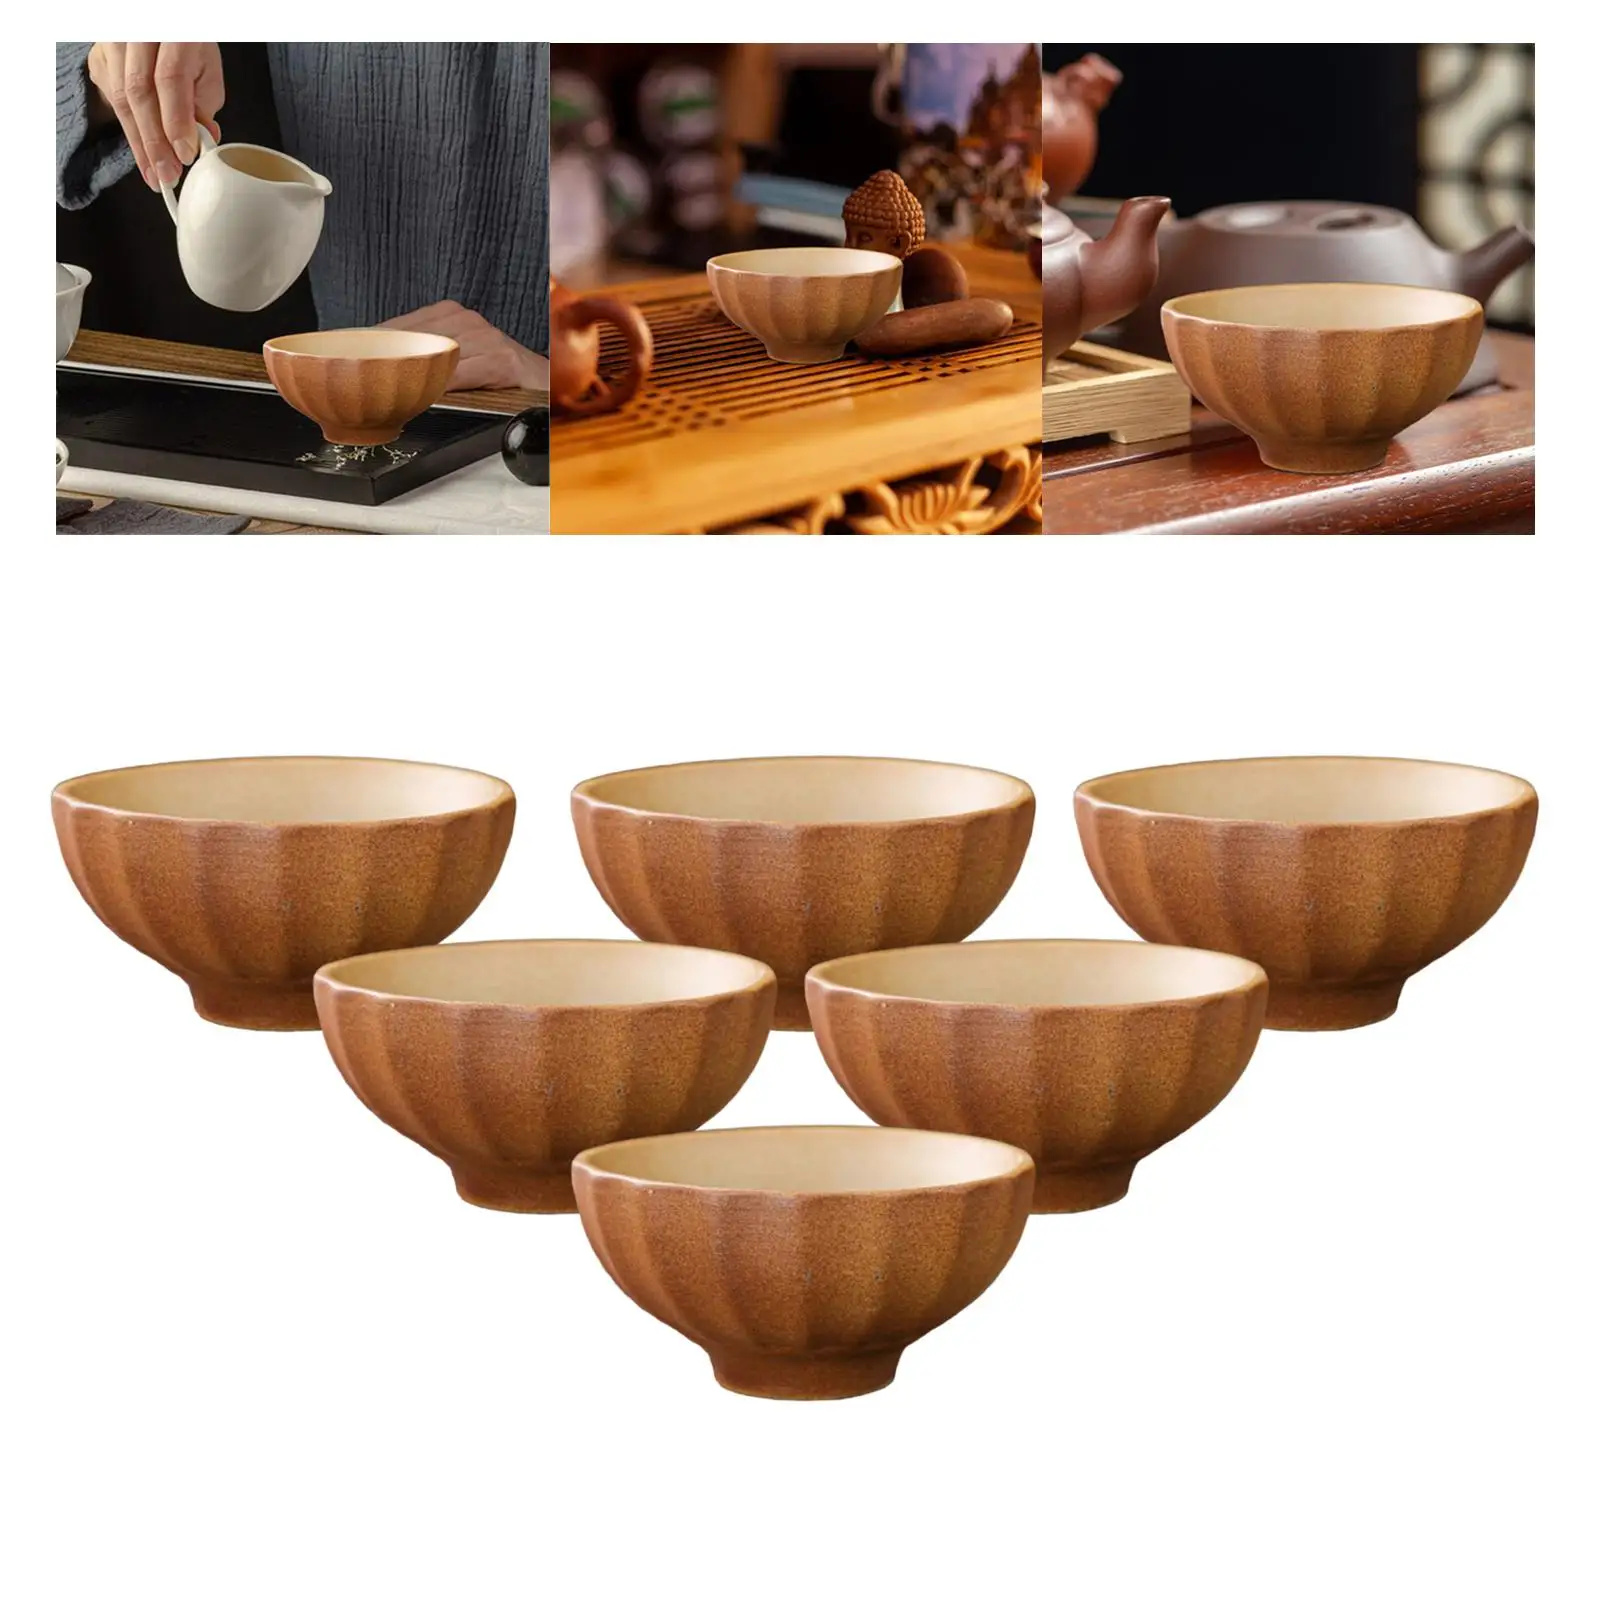 6Pcs Teacup Set Stoves Boiled Tea Petal Shape Drinkware Coffee Cup for Travel Restaurant Adults Men Women Coffee Shop Cappuccino